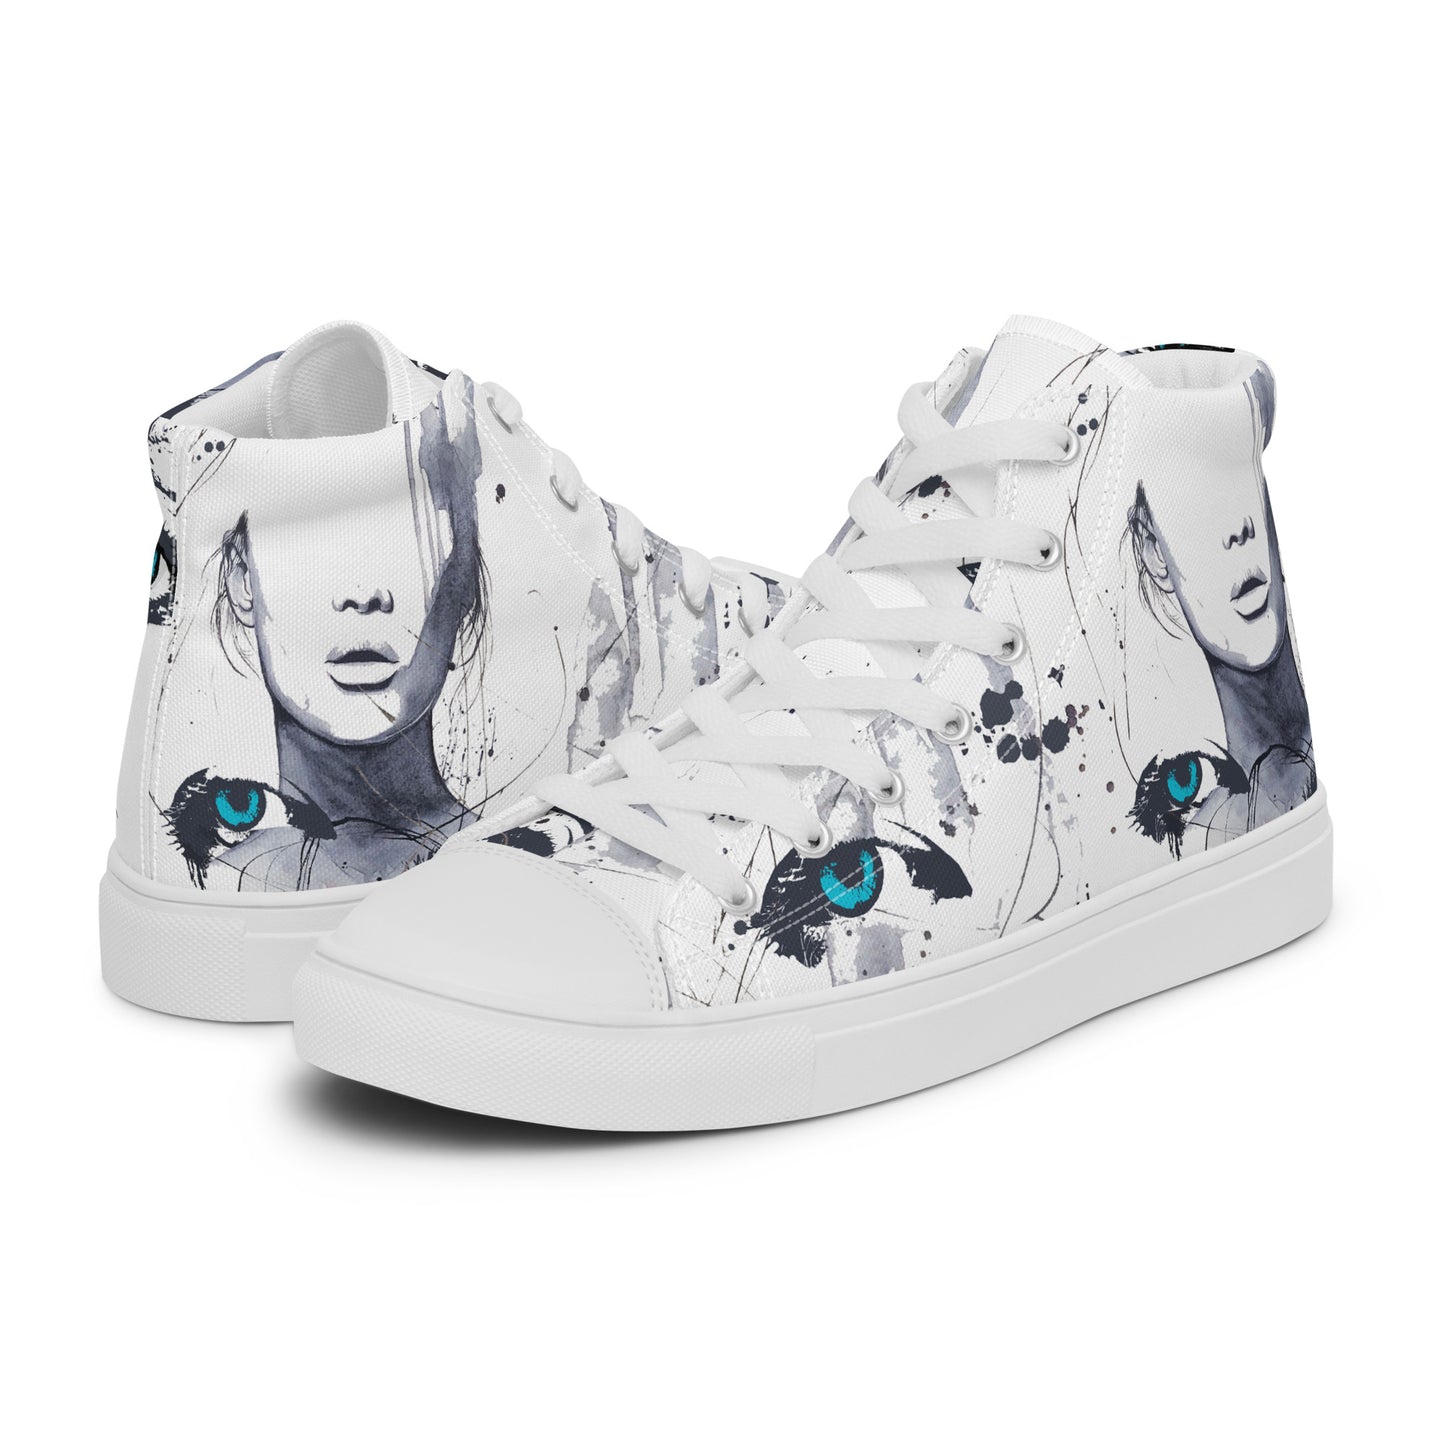 Women’s high top canvas shoes | Heartache with blue eyes